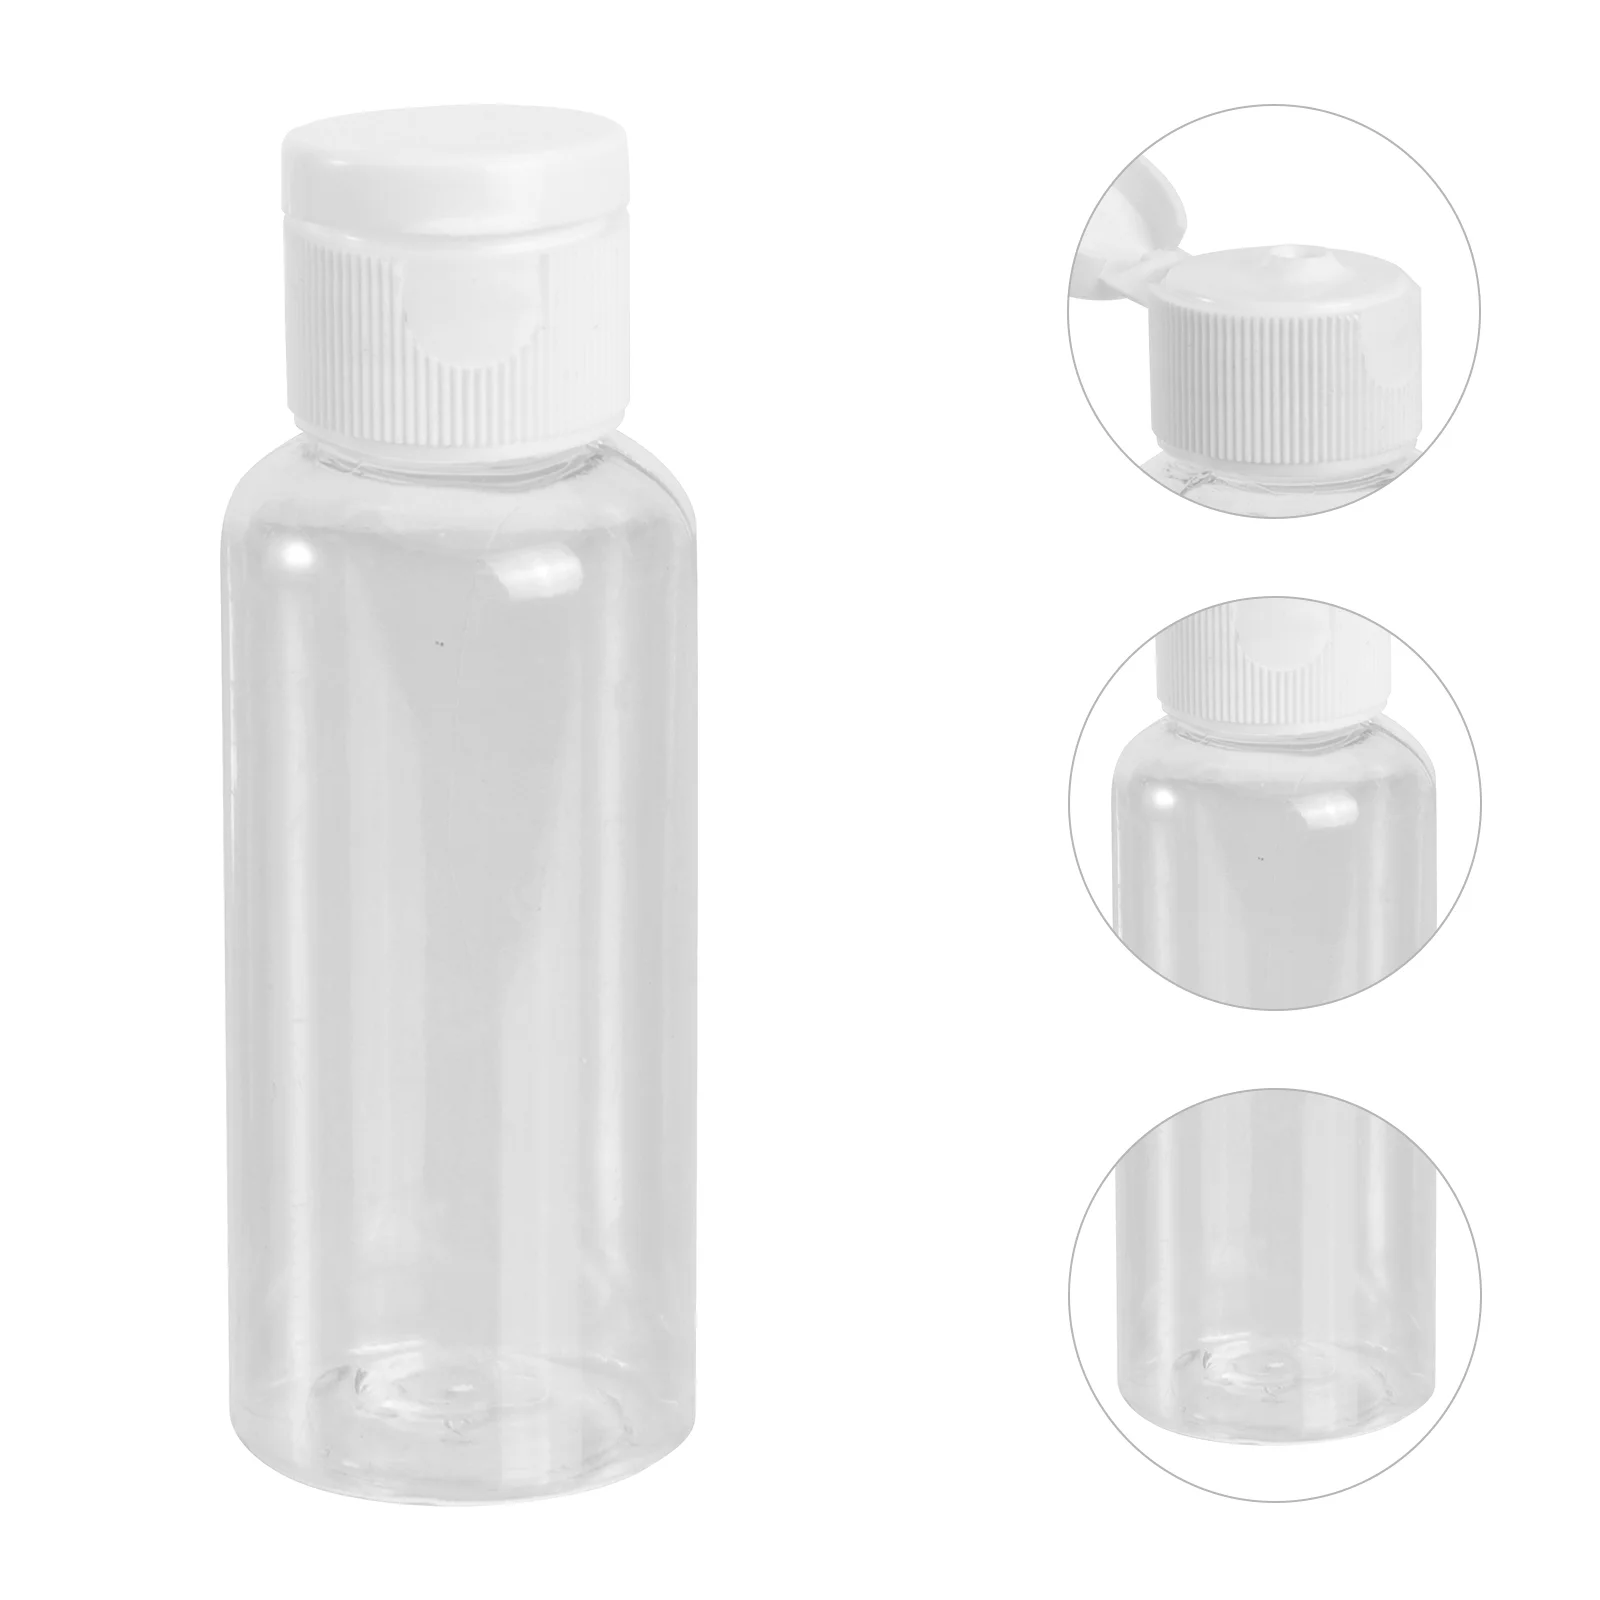 

Bottles Travel Bottle Lotion Clear Container Formakeup Refillable Jars Vial Body Wash Shampooempty Sample Squeeze Liquids